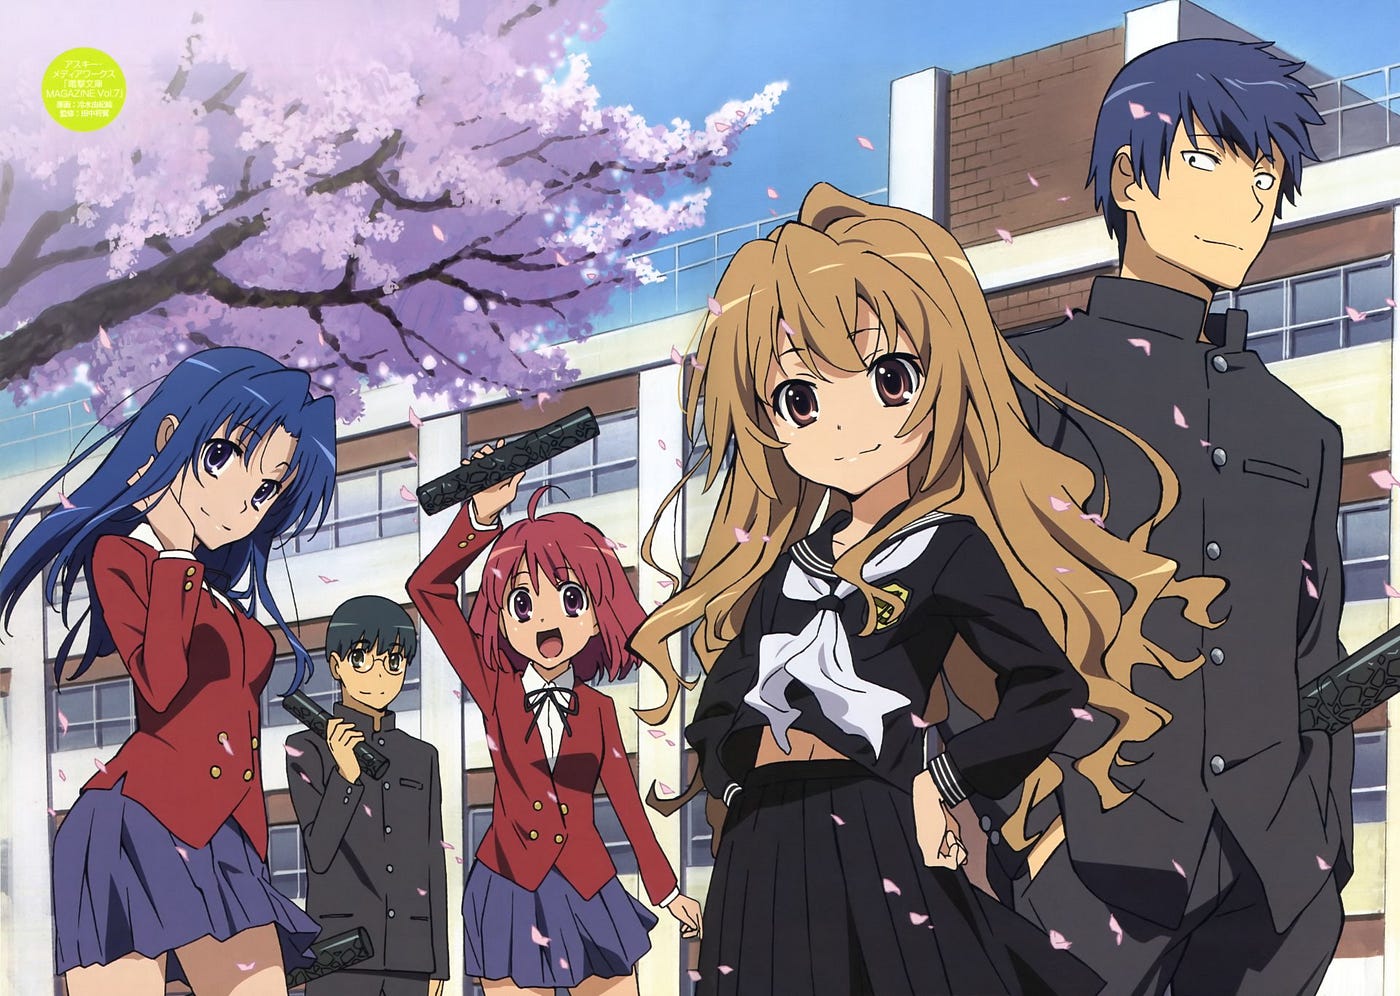 Toradora!: anime review – It's not just love…it's life